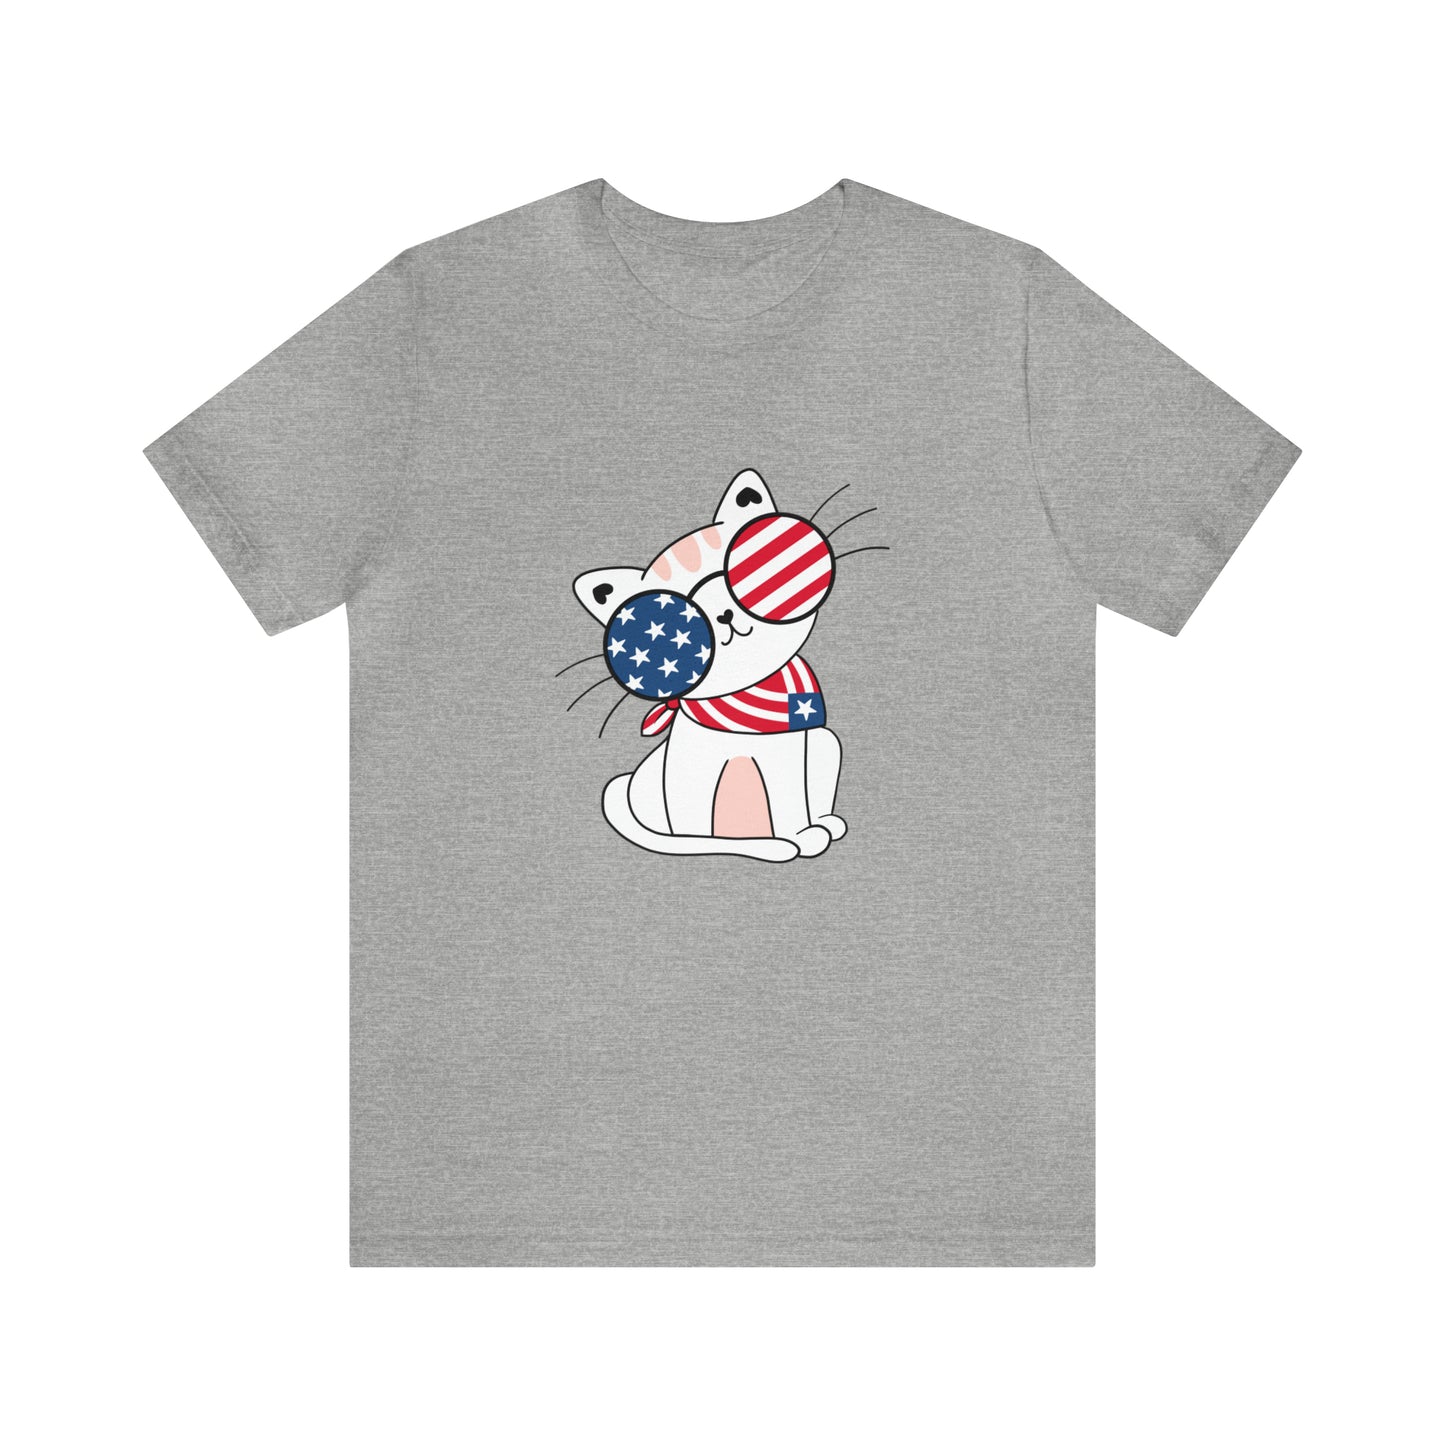 Cat wear sunglass shirt, USA Shirt, Independence Day Tee, 4th of July women's shirt, Fourth of July Tee, Printify